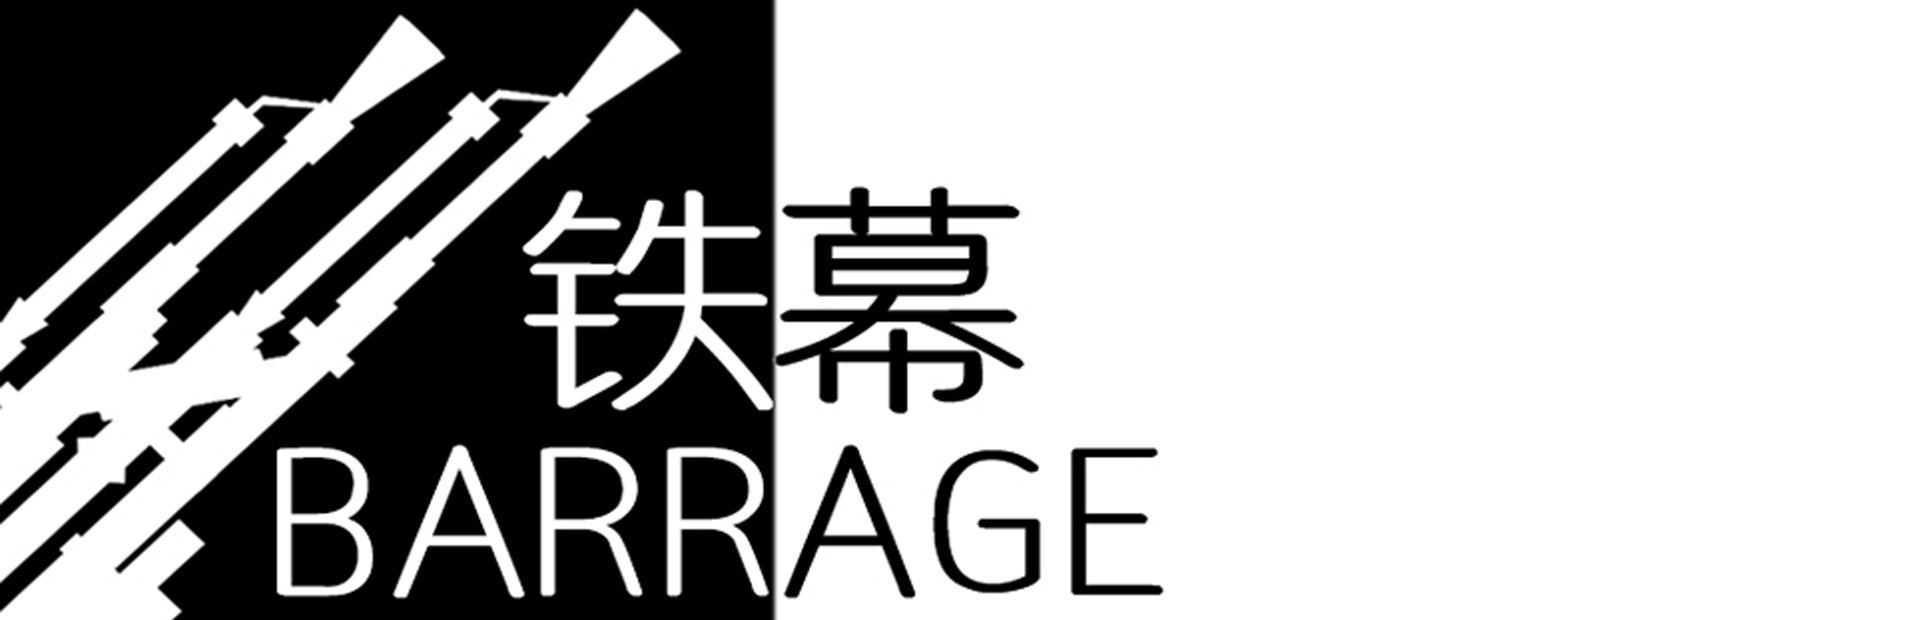 BARRAGE / 铁幕 cover image